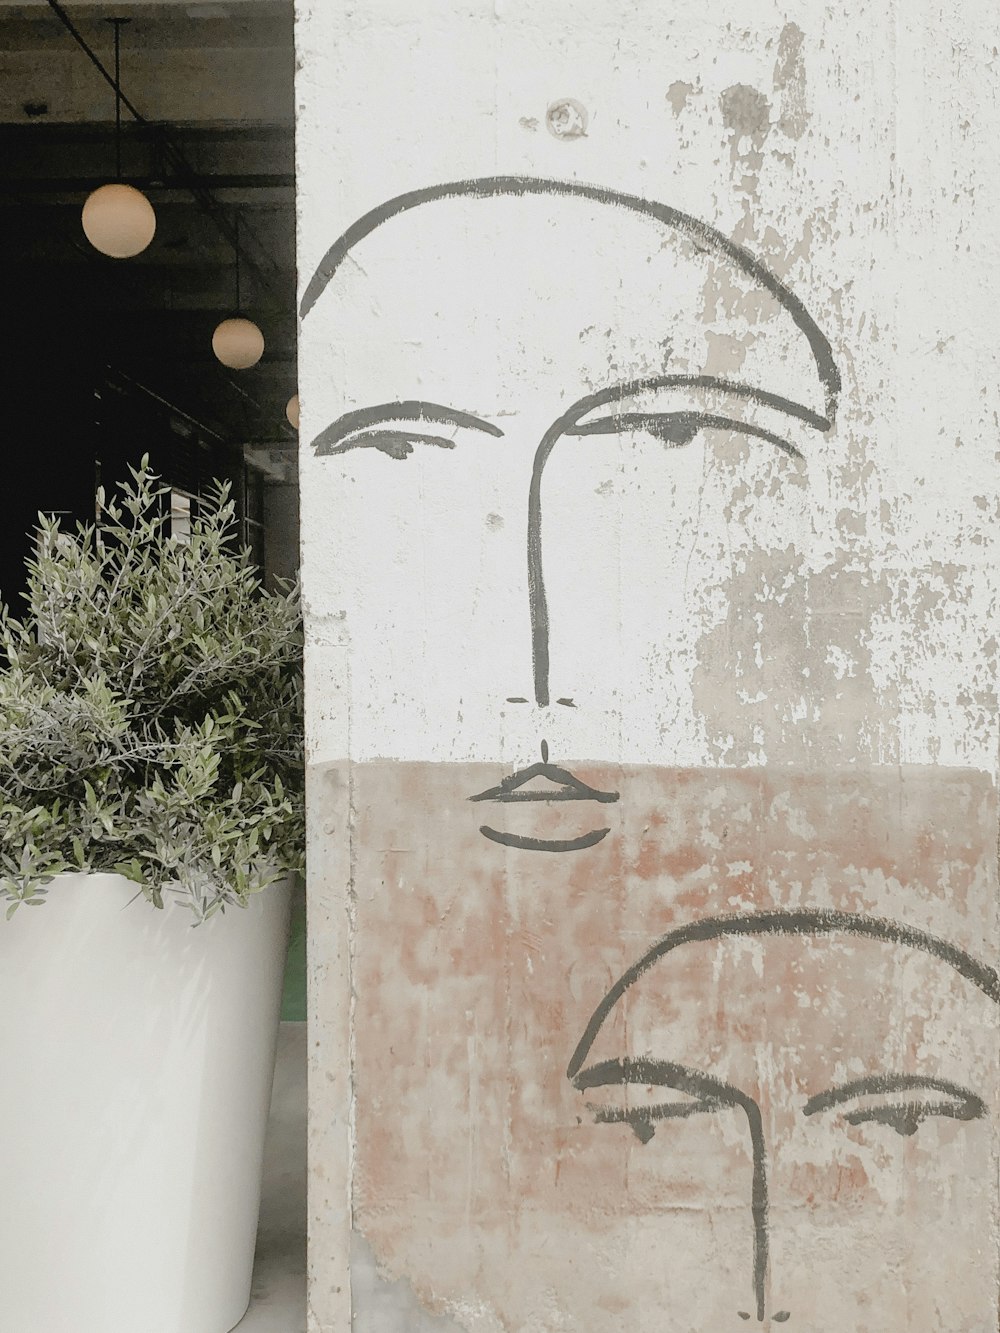 human face sketch in wall close-up photography